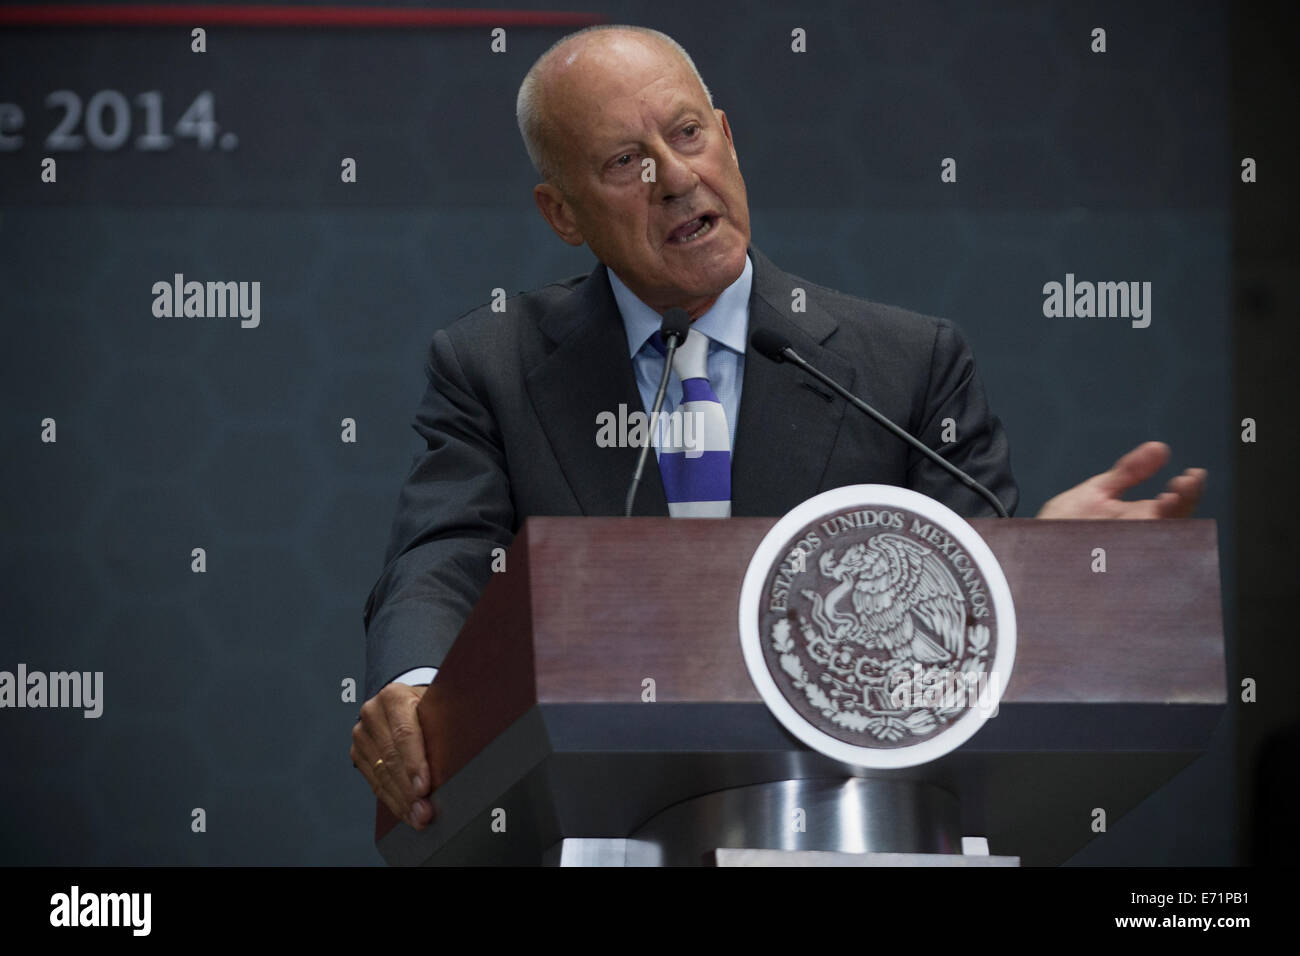 Mexico City, Mexico. 3rd Sep, 2014. British architect Sir Norman Foster delivers a speech during the announcement of the winning design for Mexico City's international airport in Mexico City, Mexico, on Sept. 3, 2014. 2014. British architect Norman Foster and Mexico's Fernando Romero were announced here to be the winners for the design contract of Mexcio City's new airport. With a budget of 9.23 billion U.S. dollars, the new airport will have six landing strips and serve 126 million passengers a year Credit:  Xinhua/Alamy Live News Stock Photo